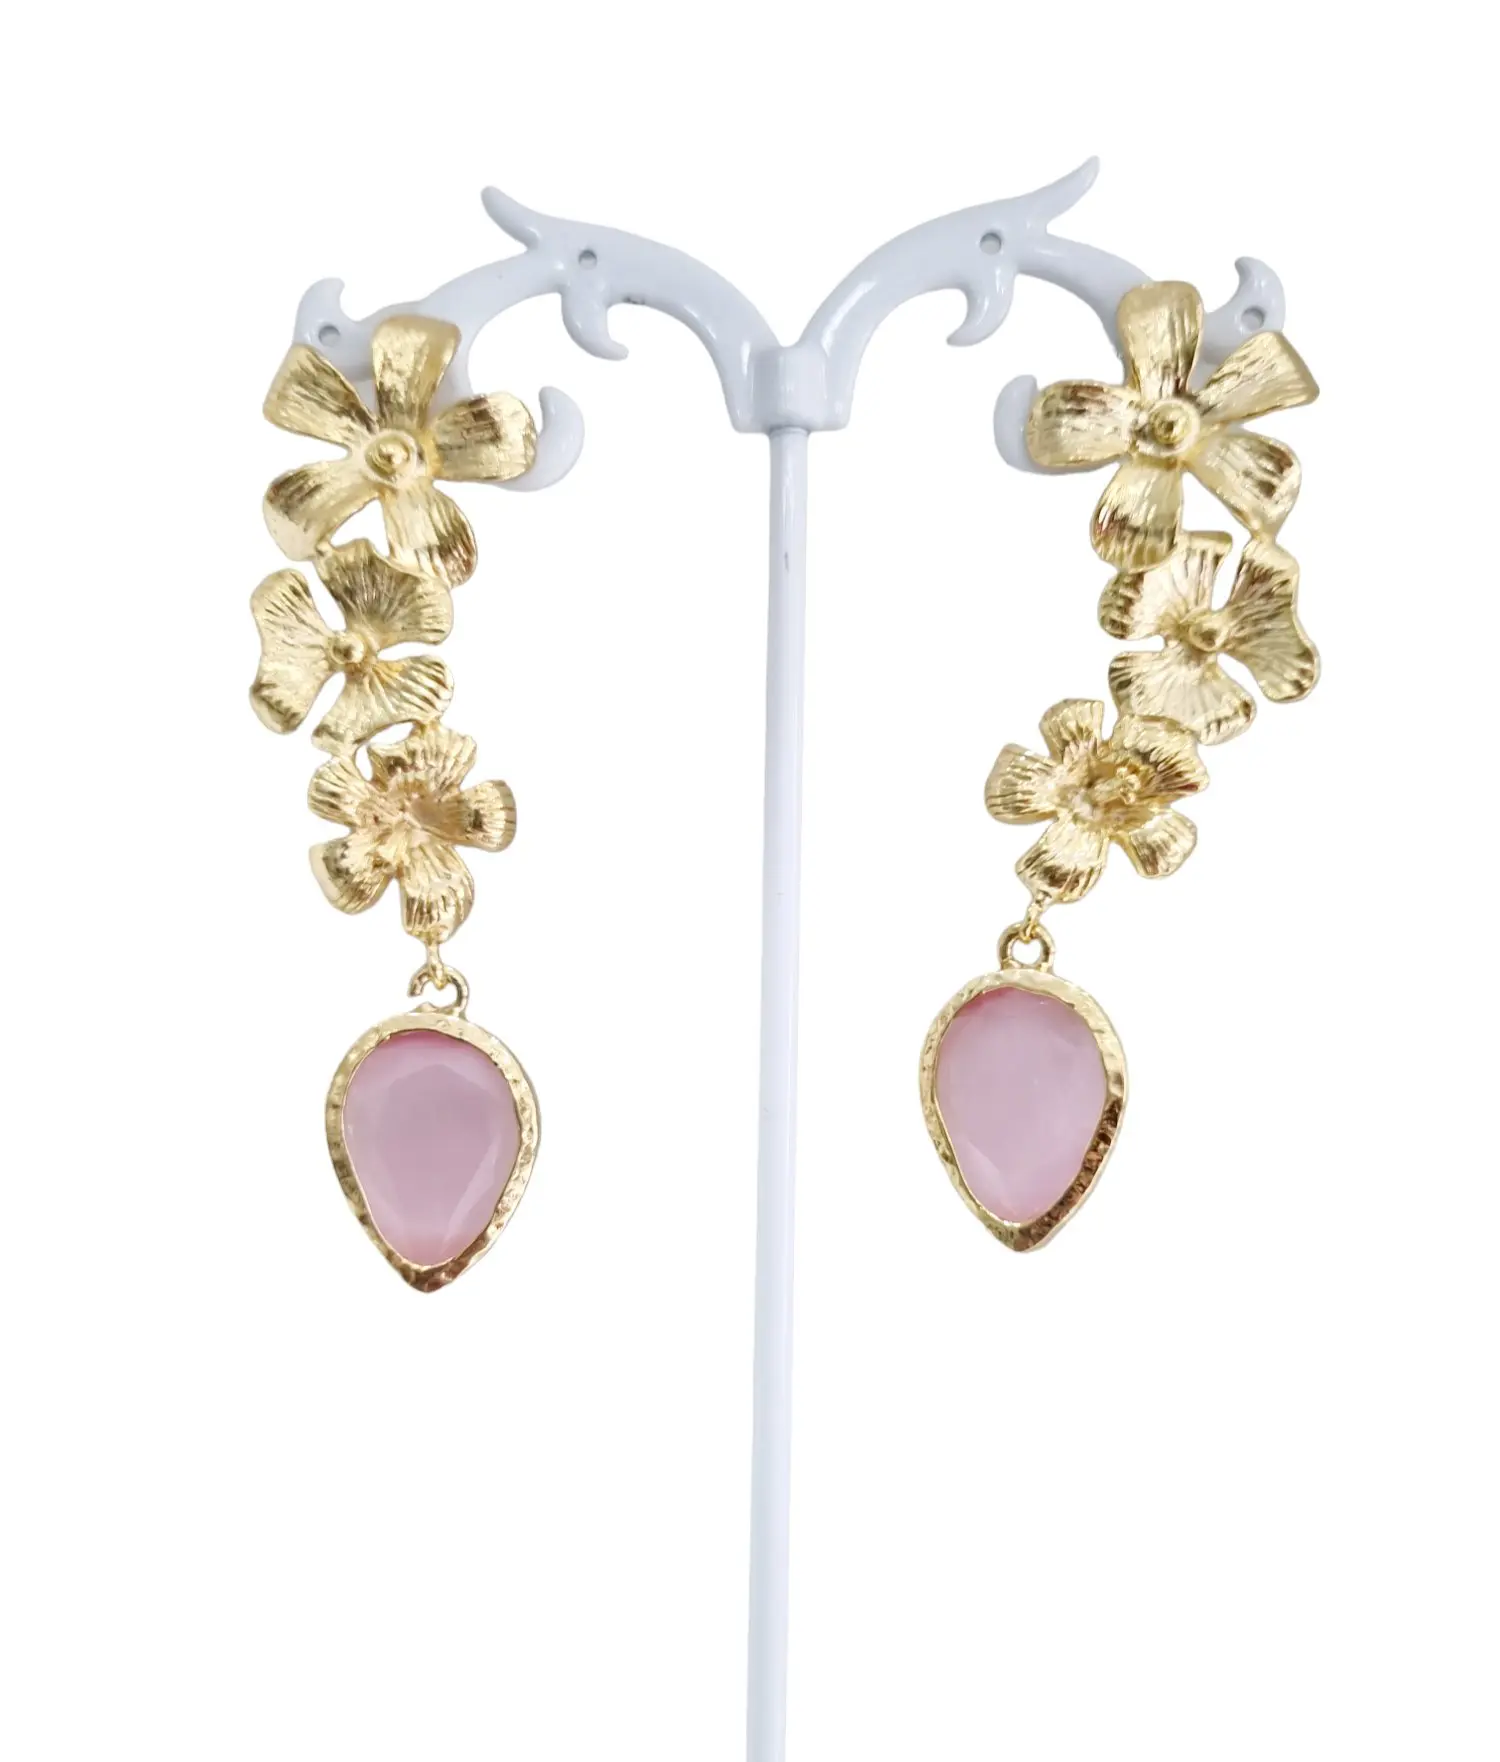 Earrings made with golden brass flowers and pink cat's eye stone. Weight 8.3 g Length 7cm